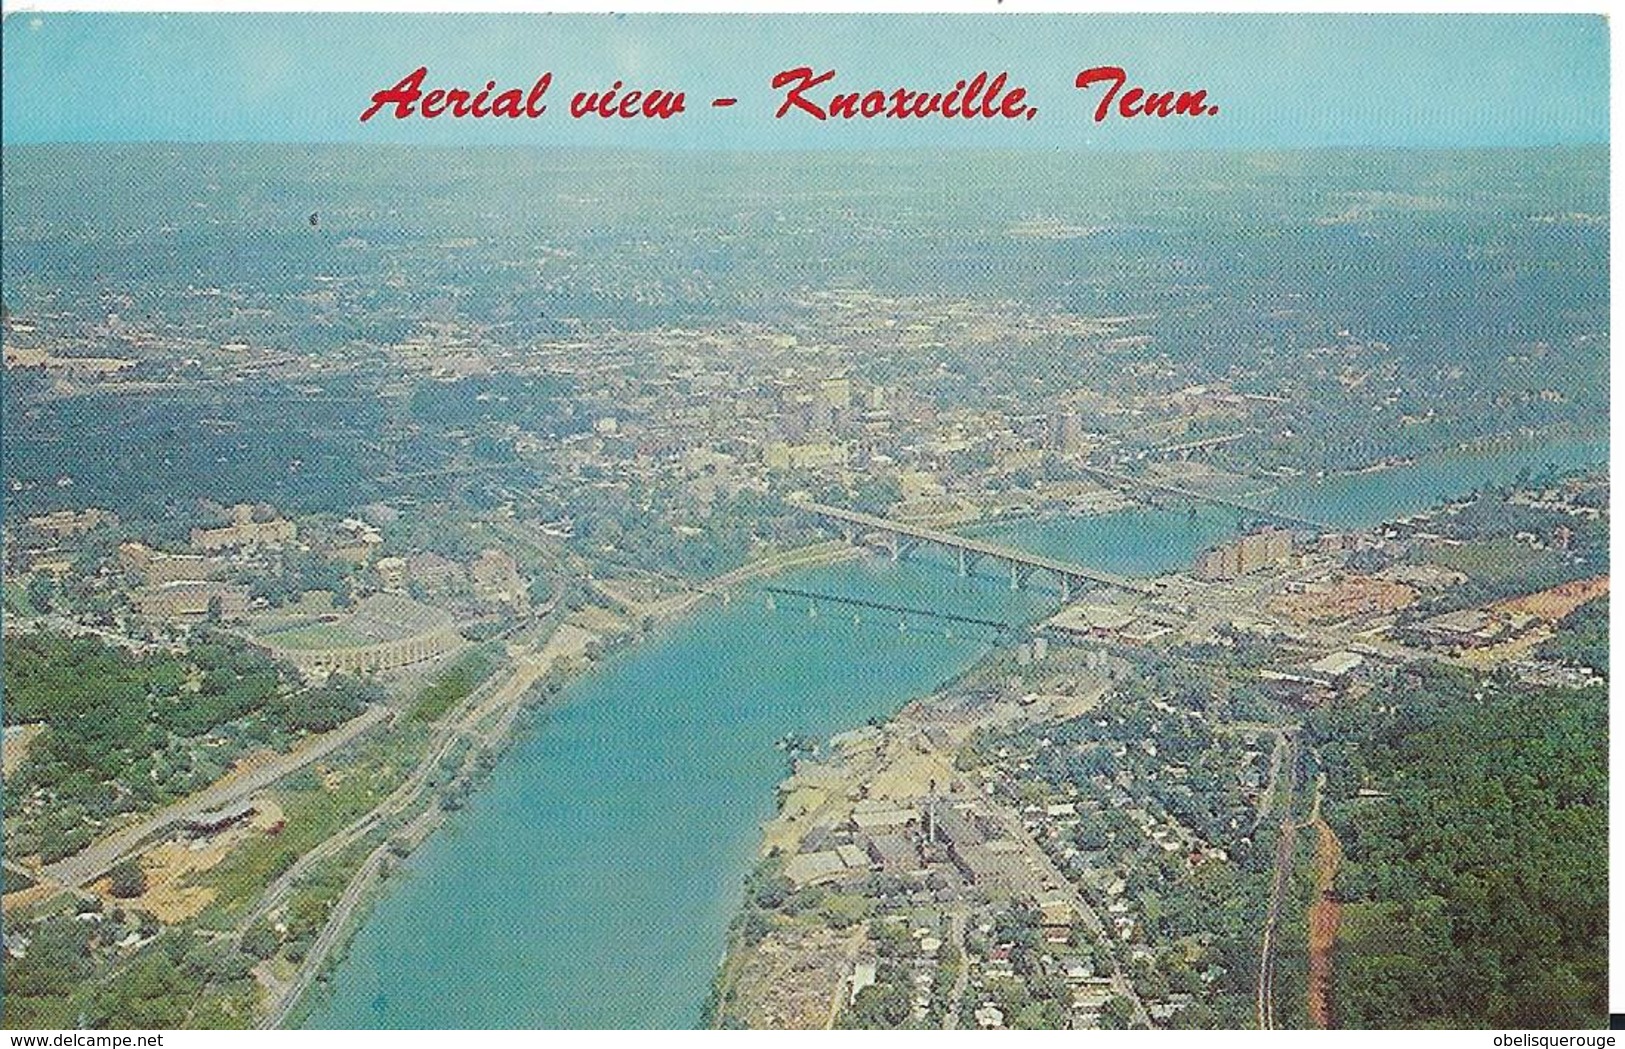 TN Tennessee > Knoxville AERAL VIEW VUE AERIENNE - Knoxville